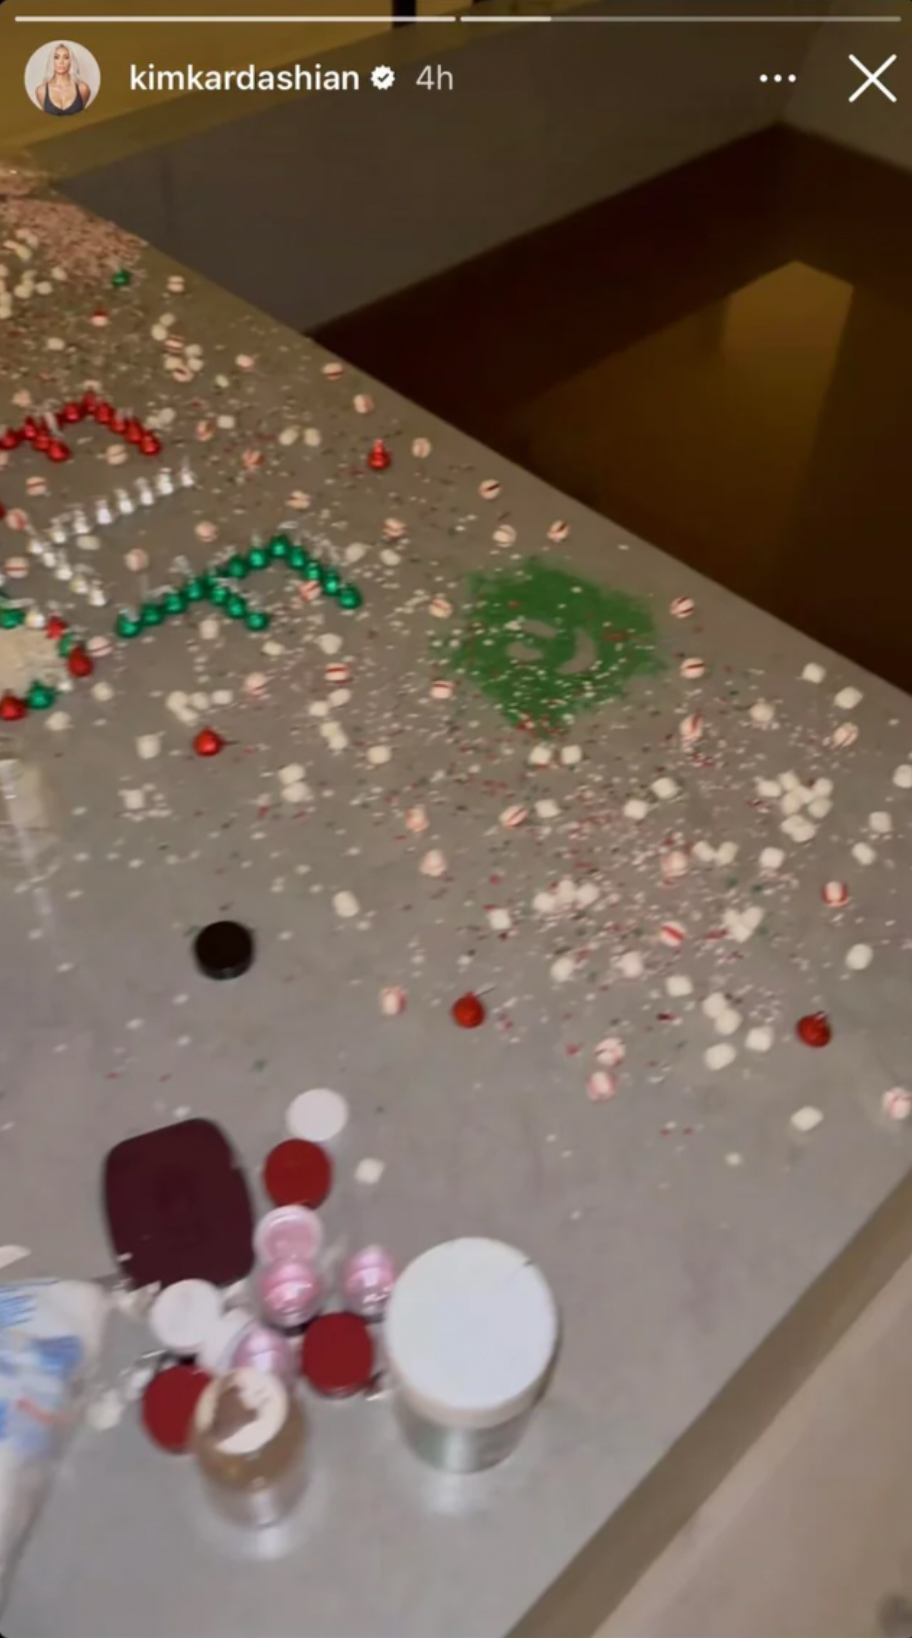 She decided to make a giant mess with candy scattered across a table